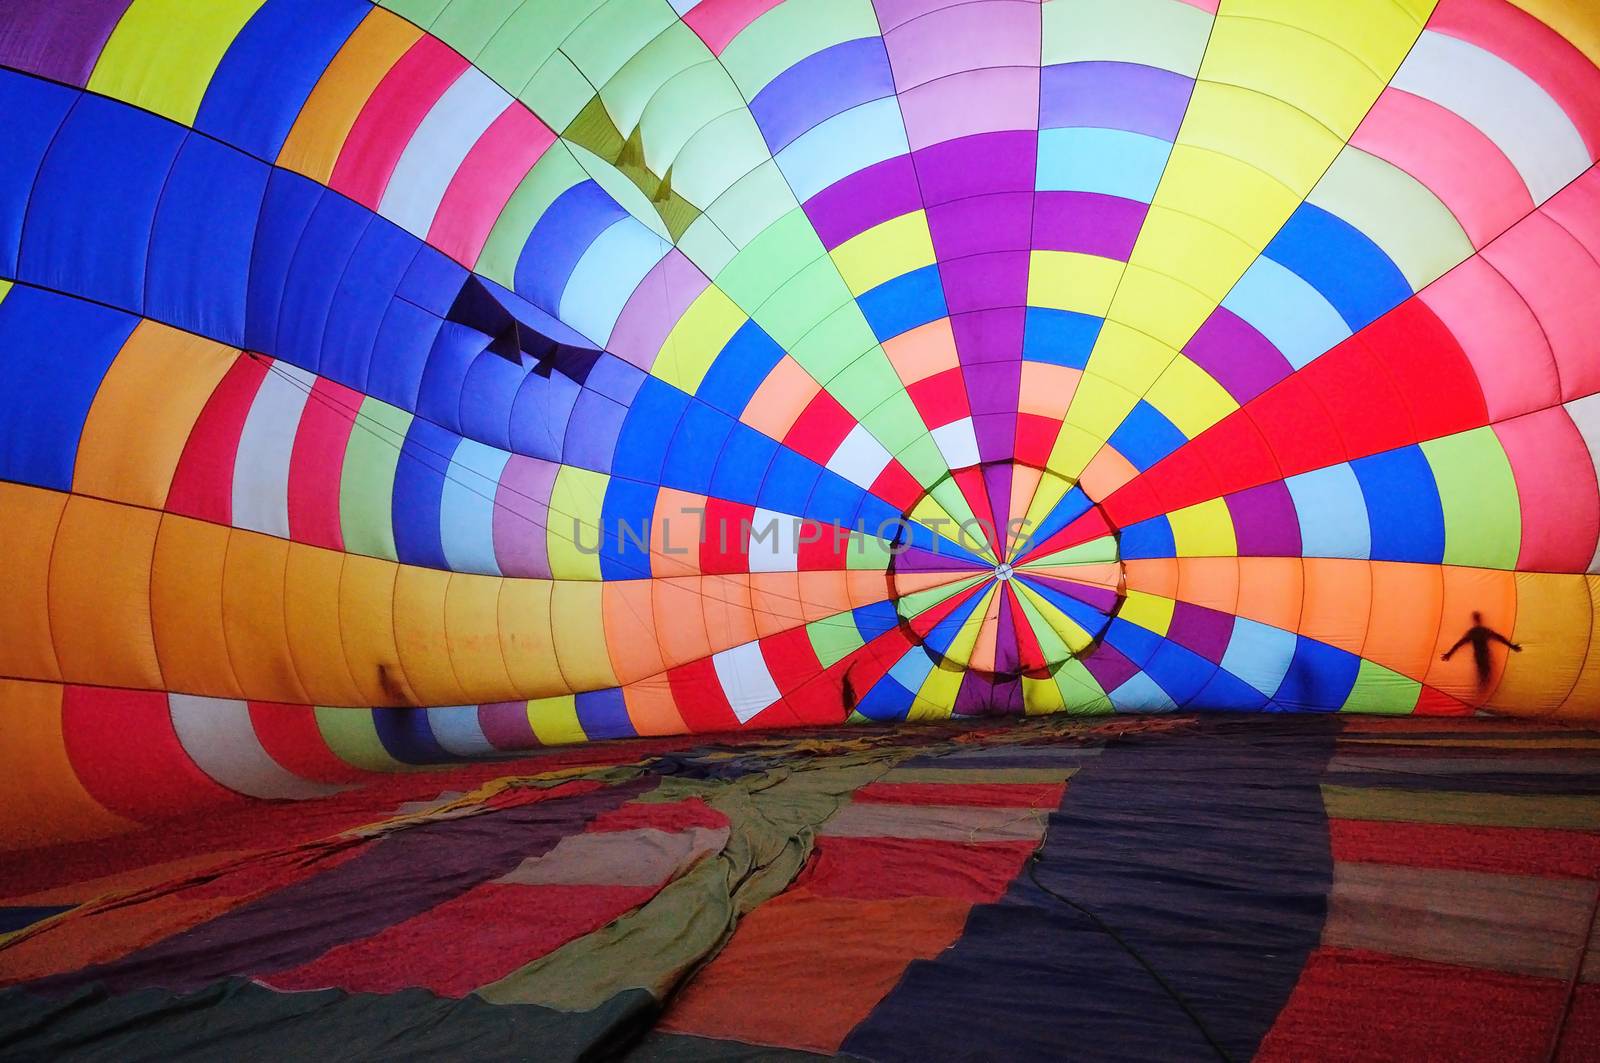 This picture is taken inside of a hot air ballon before raising into the air.